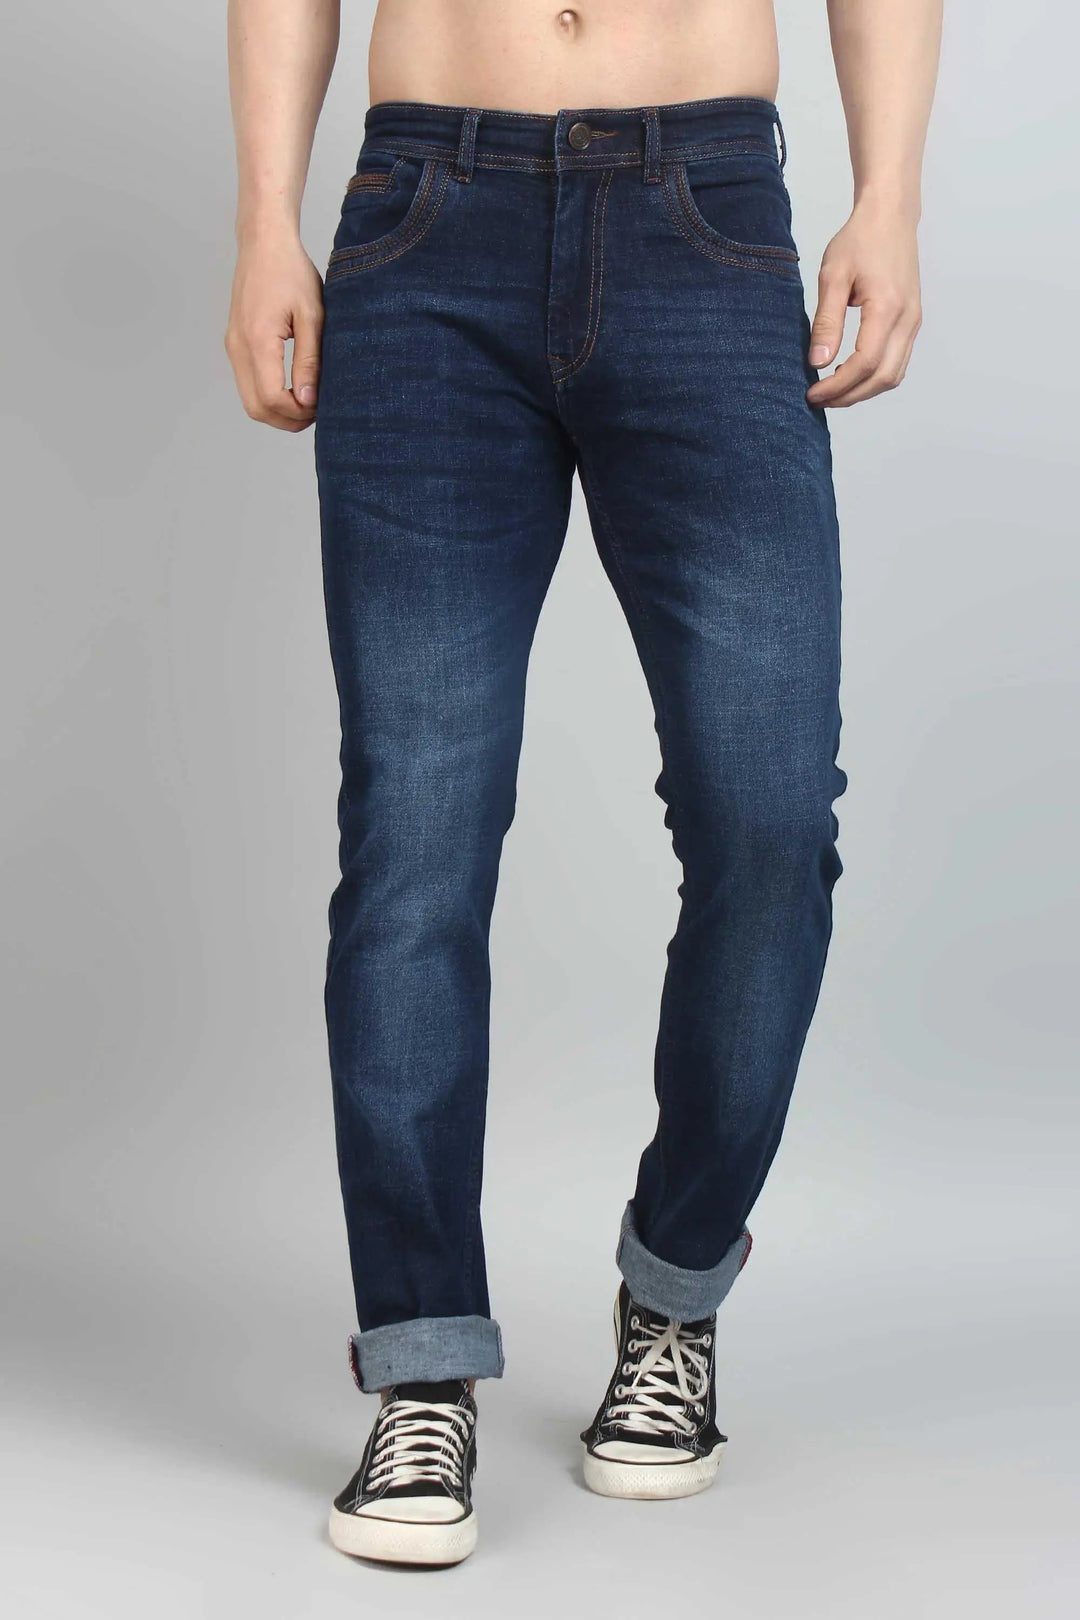 Buy Relaxed Fit Jeans For Men – Peplos Jeans